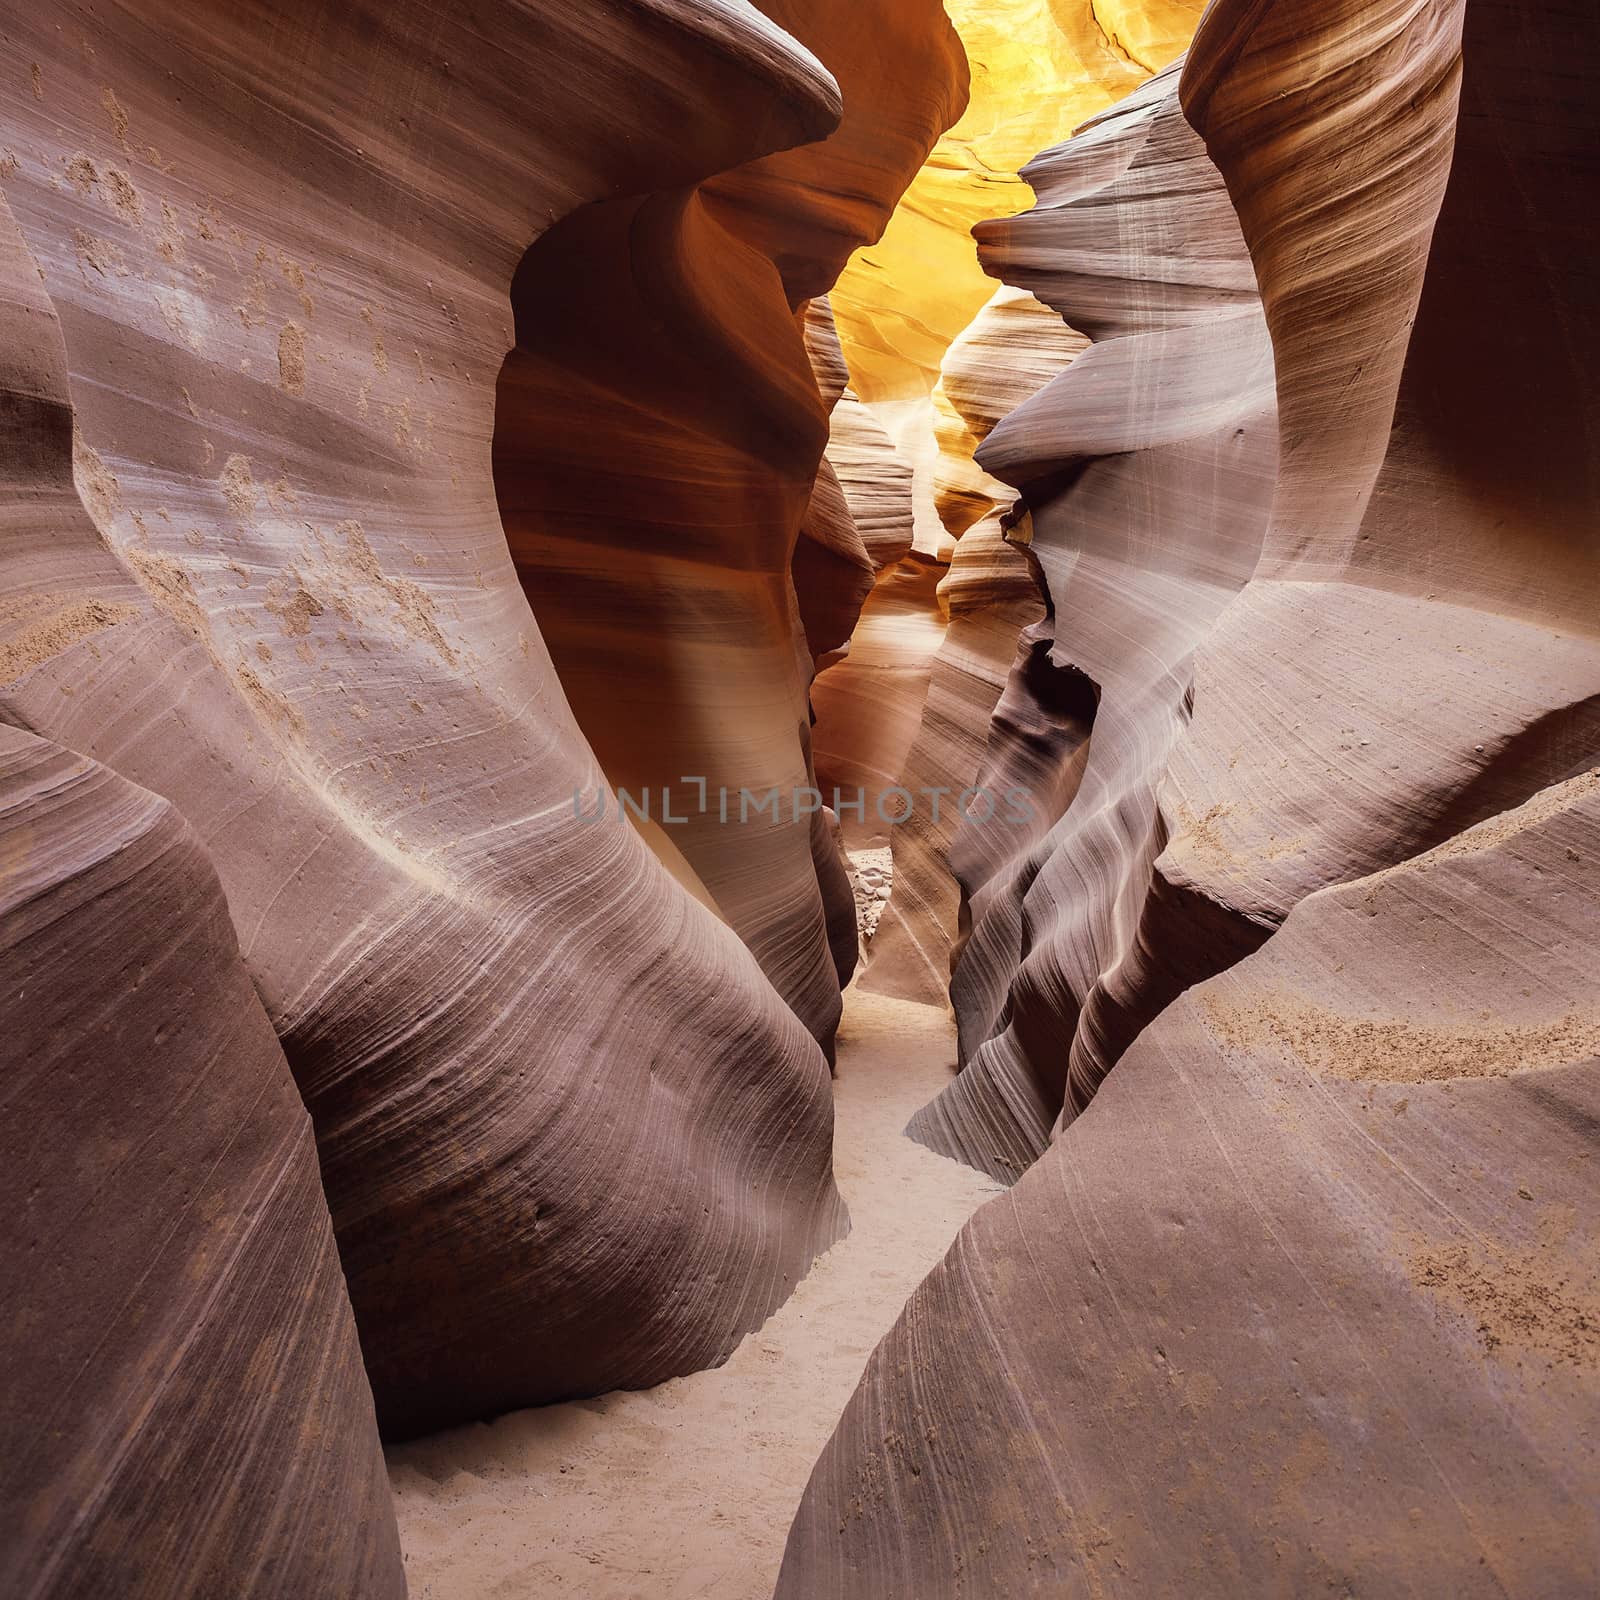 View in Antelope Canyon by vwalakte